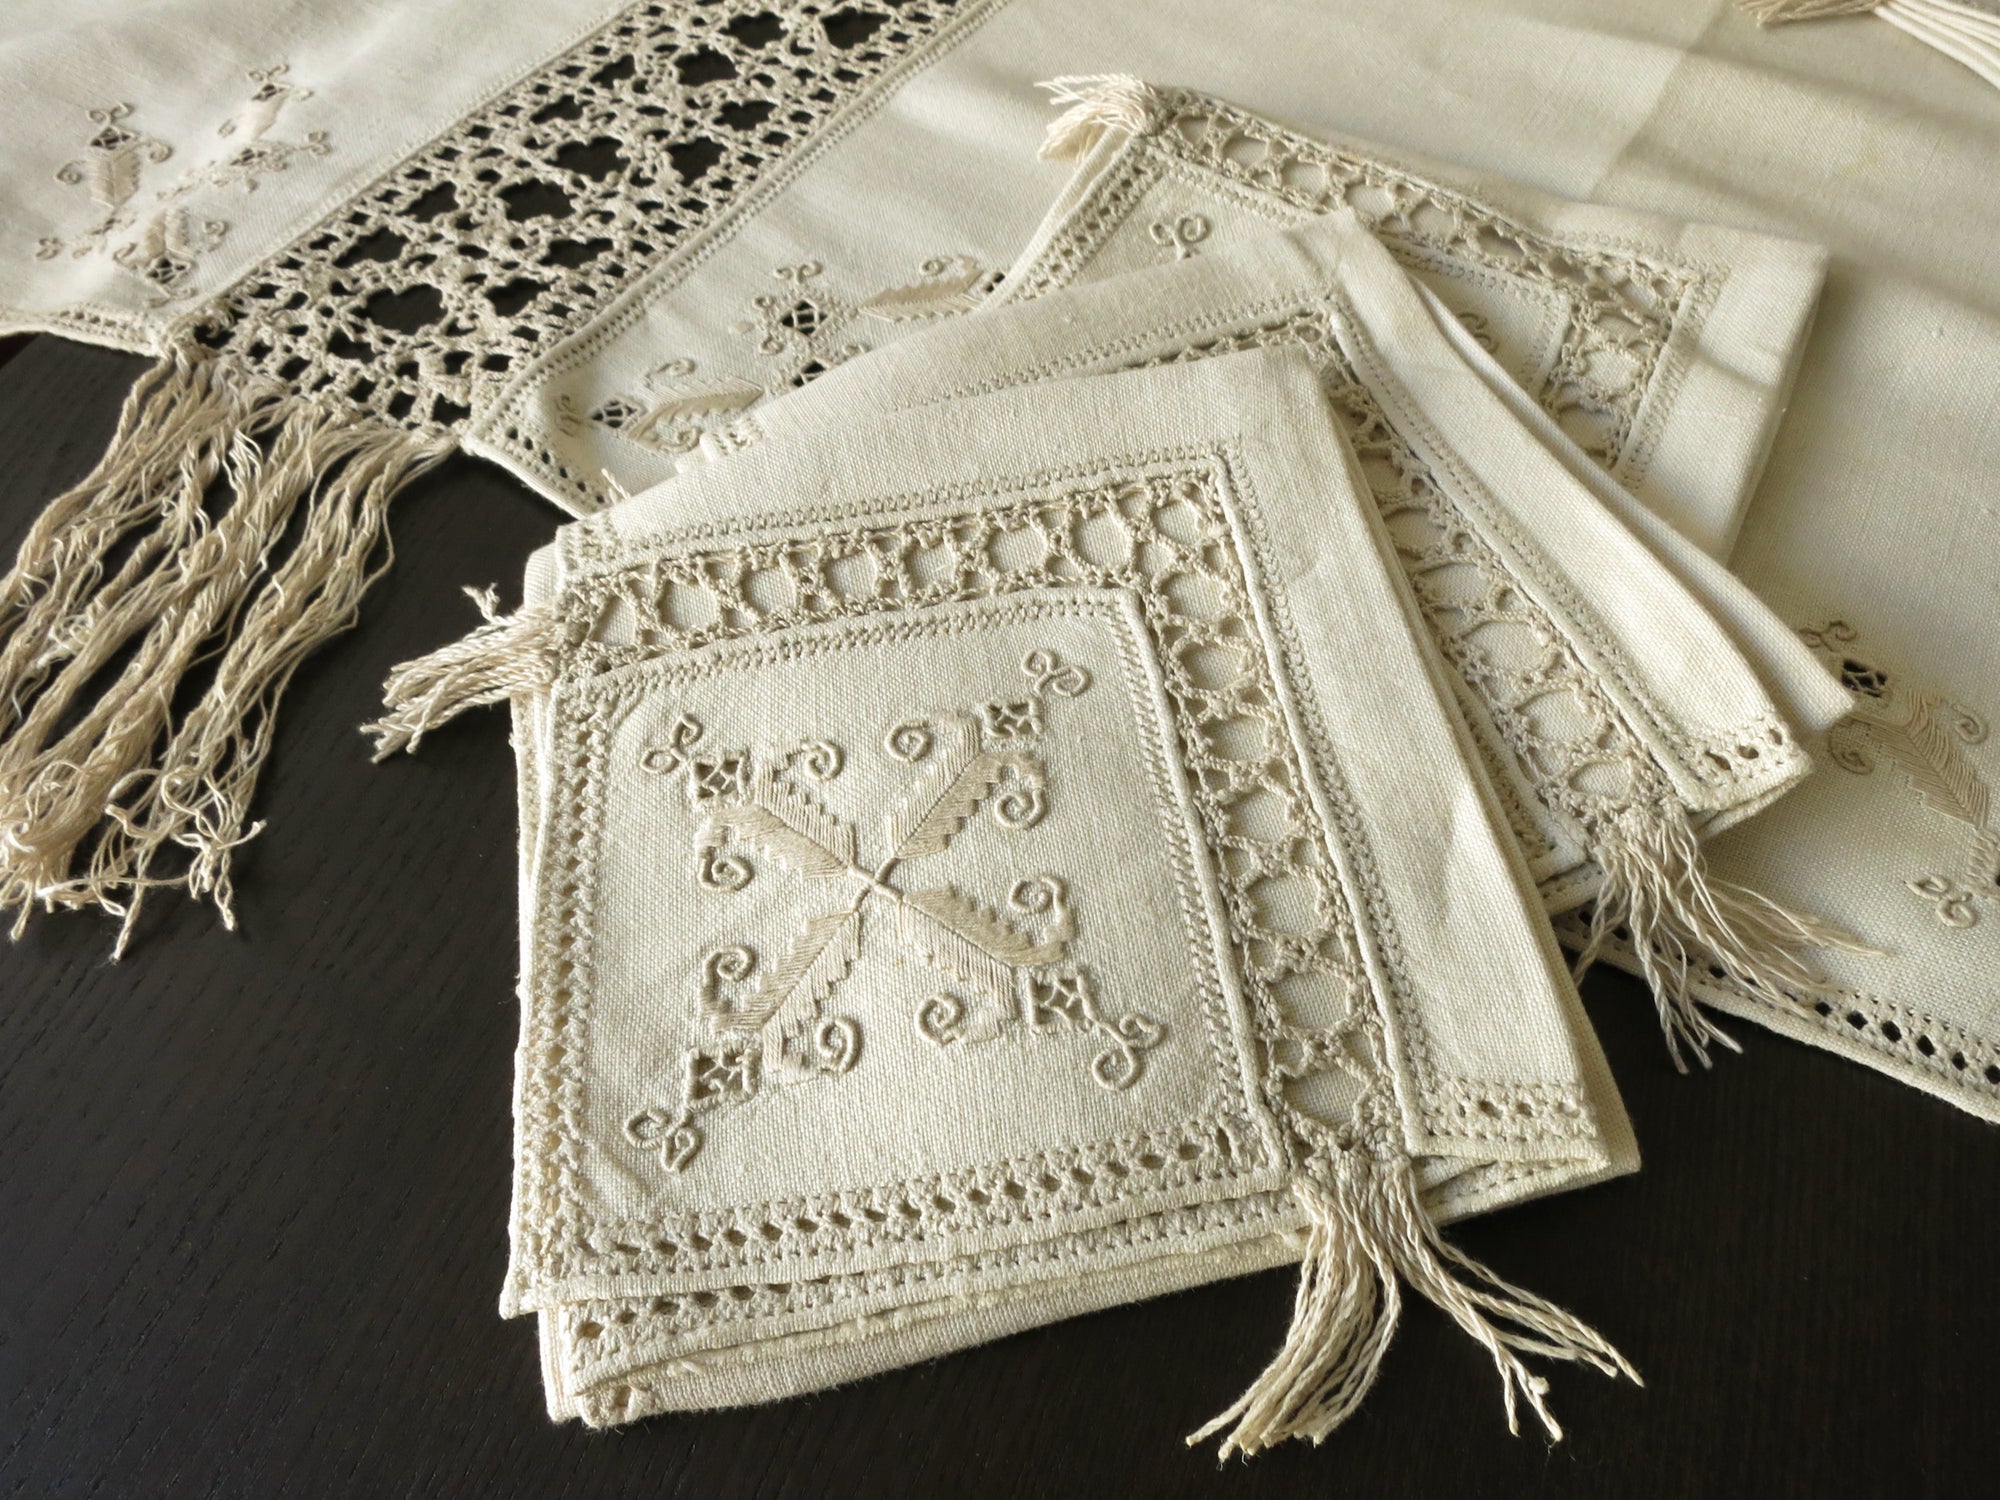 Fringed Antique Italian Linen & Lace Tablecloth 12 Napkins 70x120"